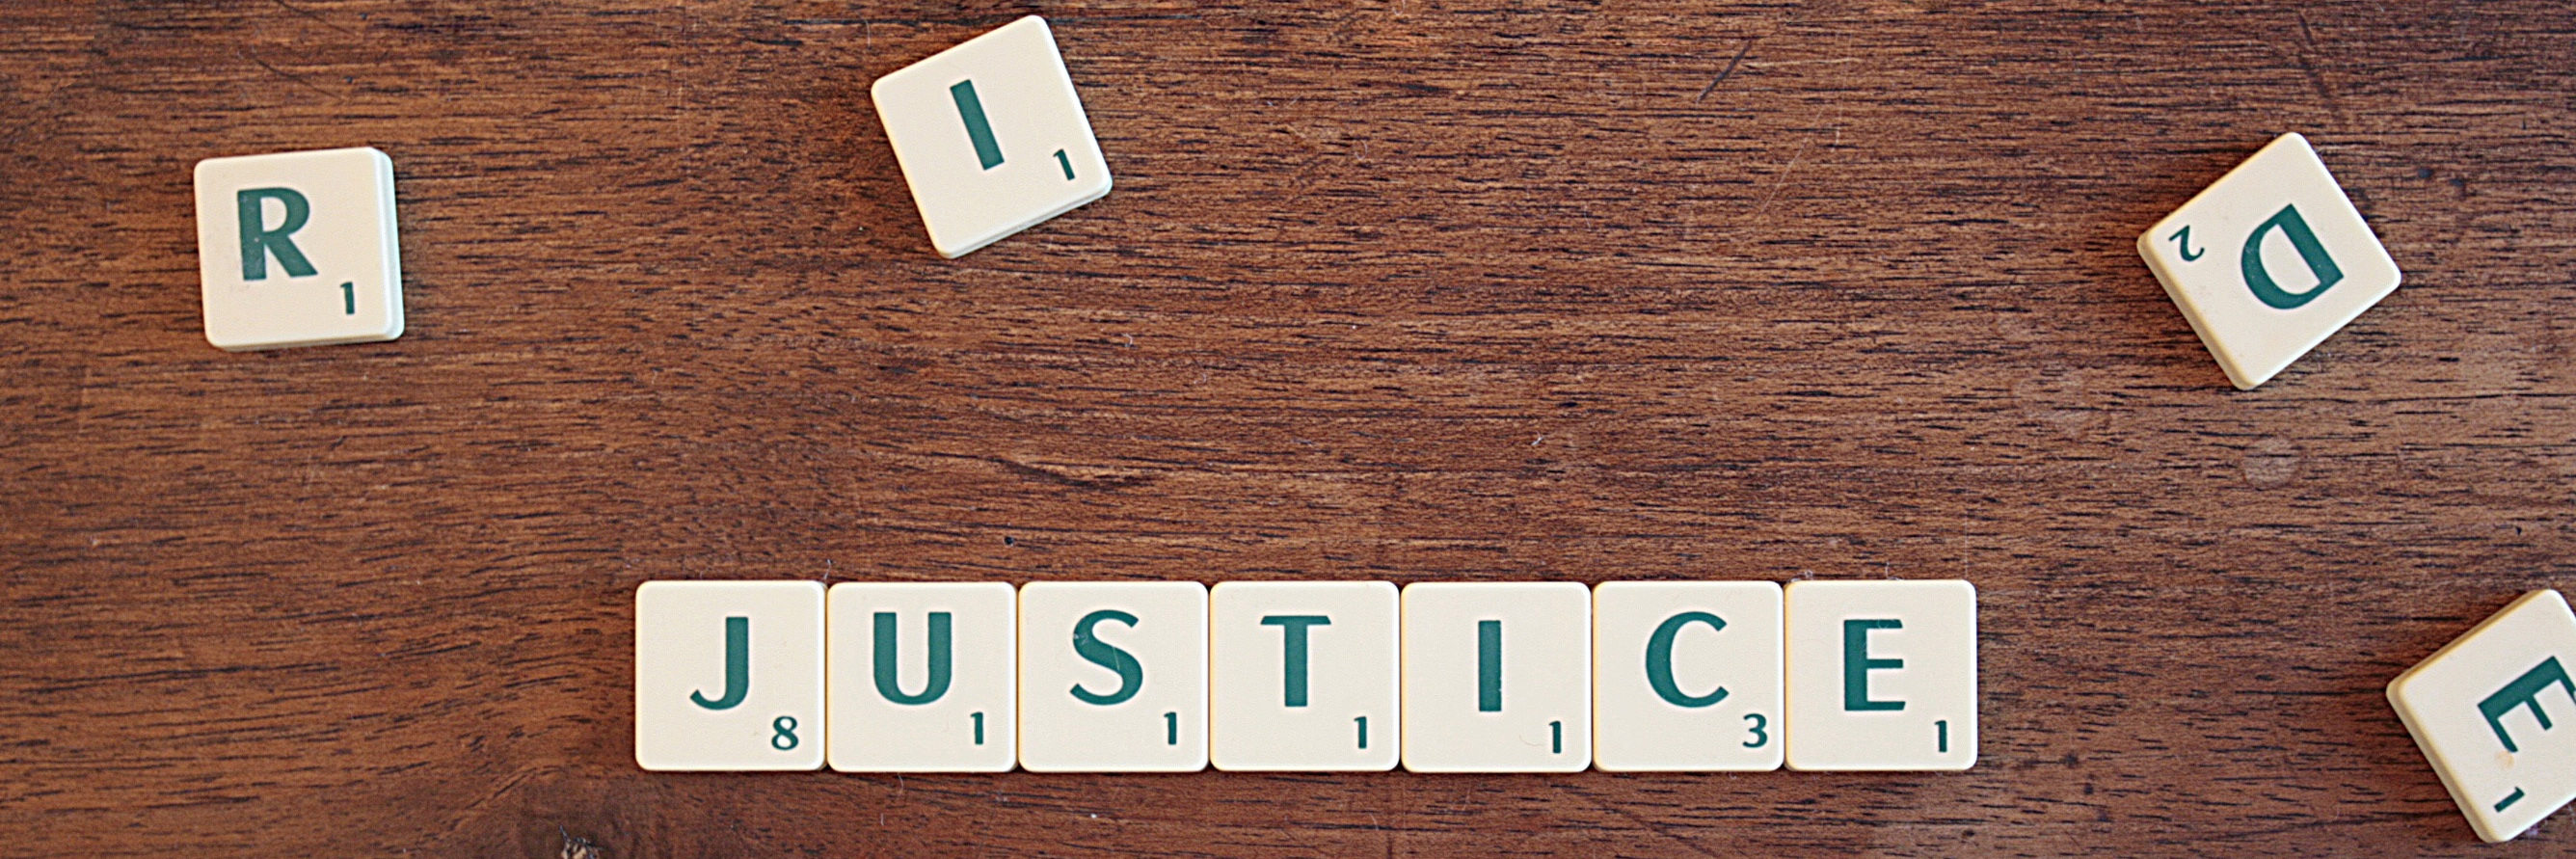 The word justice is laid out as a letter puzzle